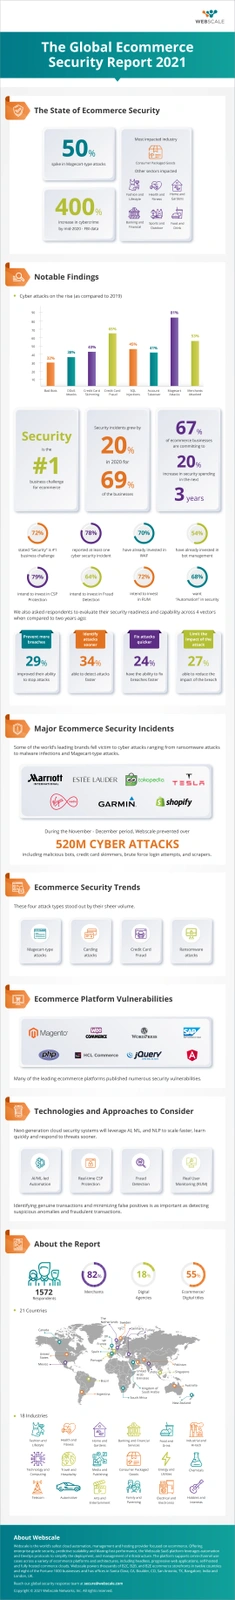 Infographic - The 2021 Global Ecommerce Security Report